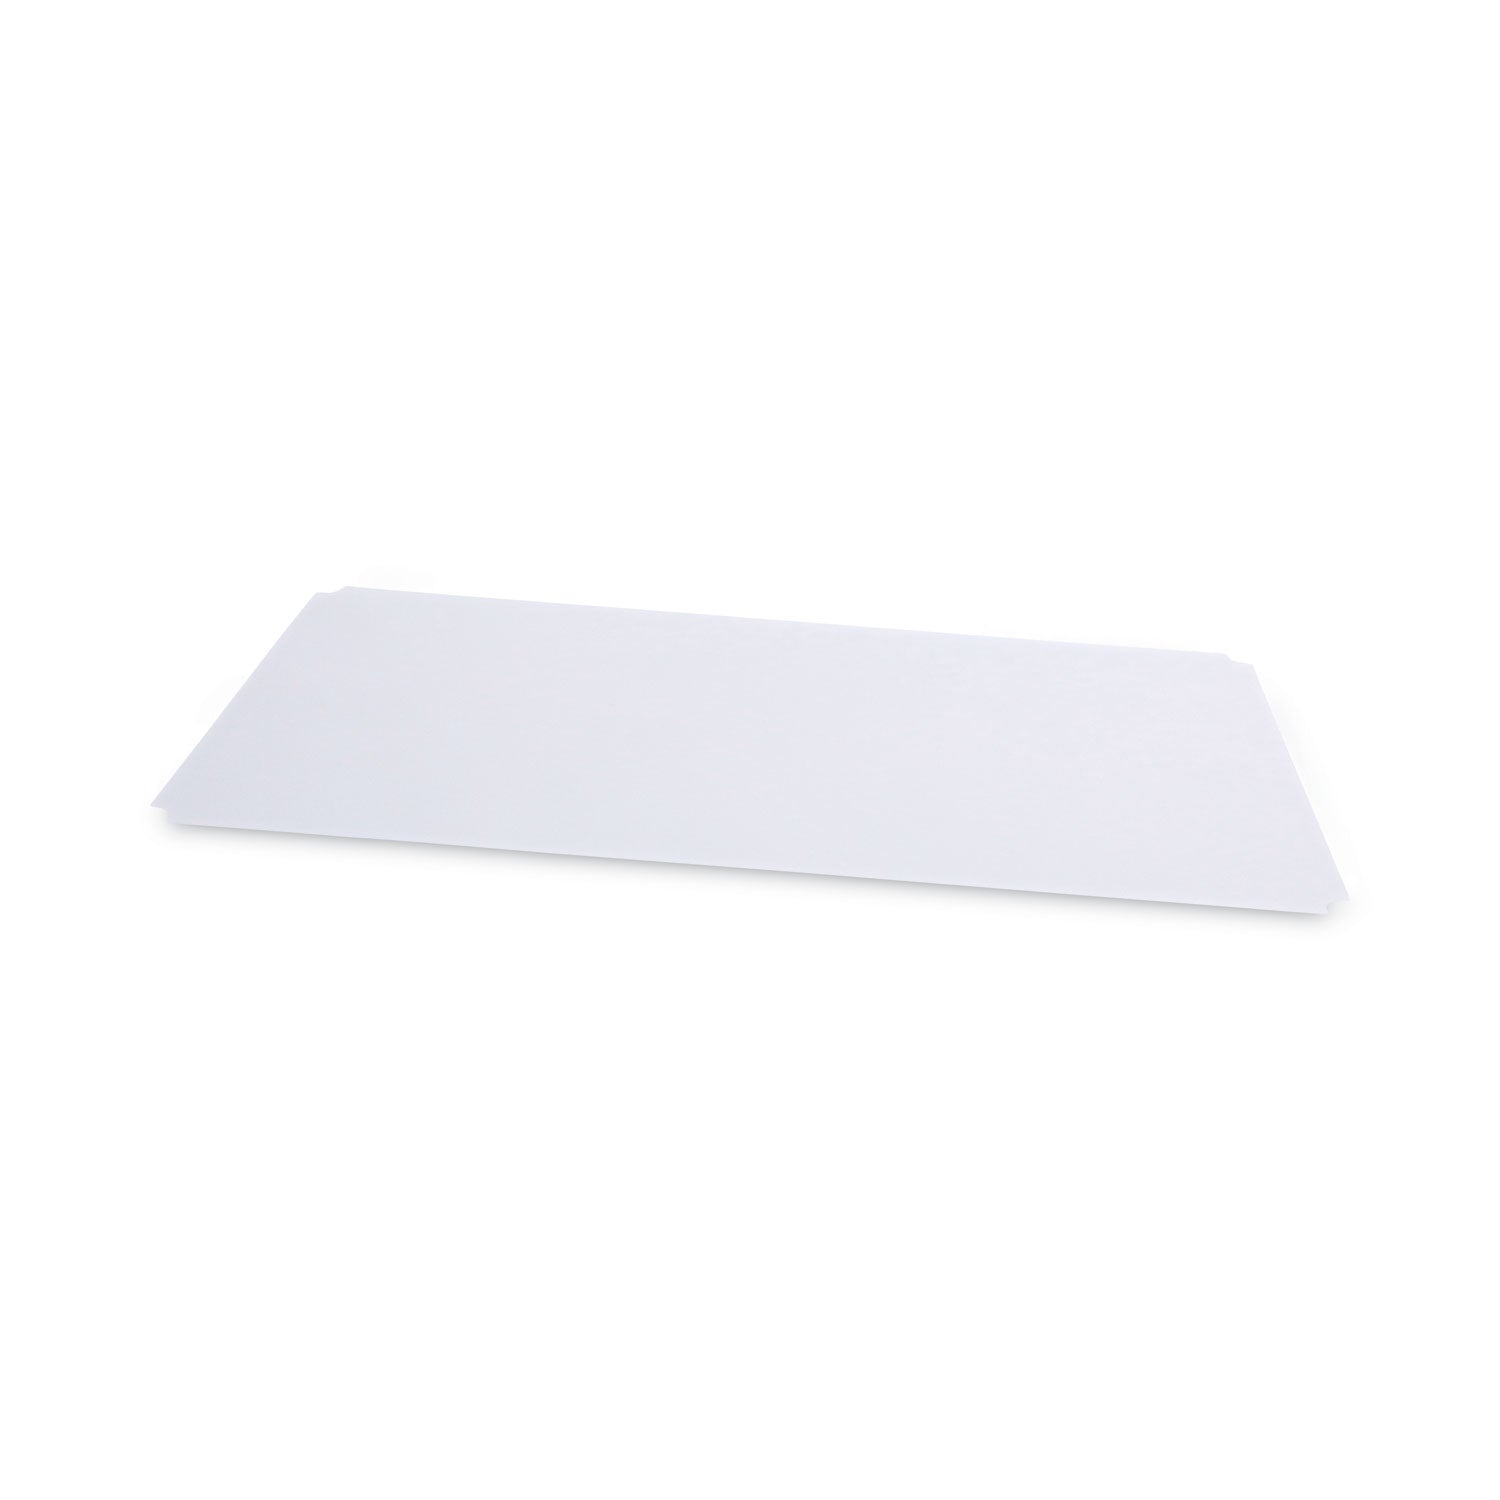 Shelf Liners For Wire Shelving, Clear Plastic, 48w x 24d, 4/Pack - 